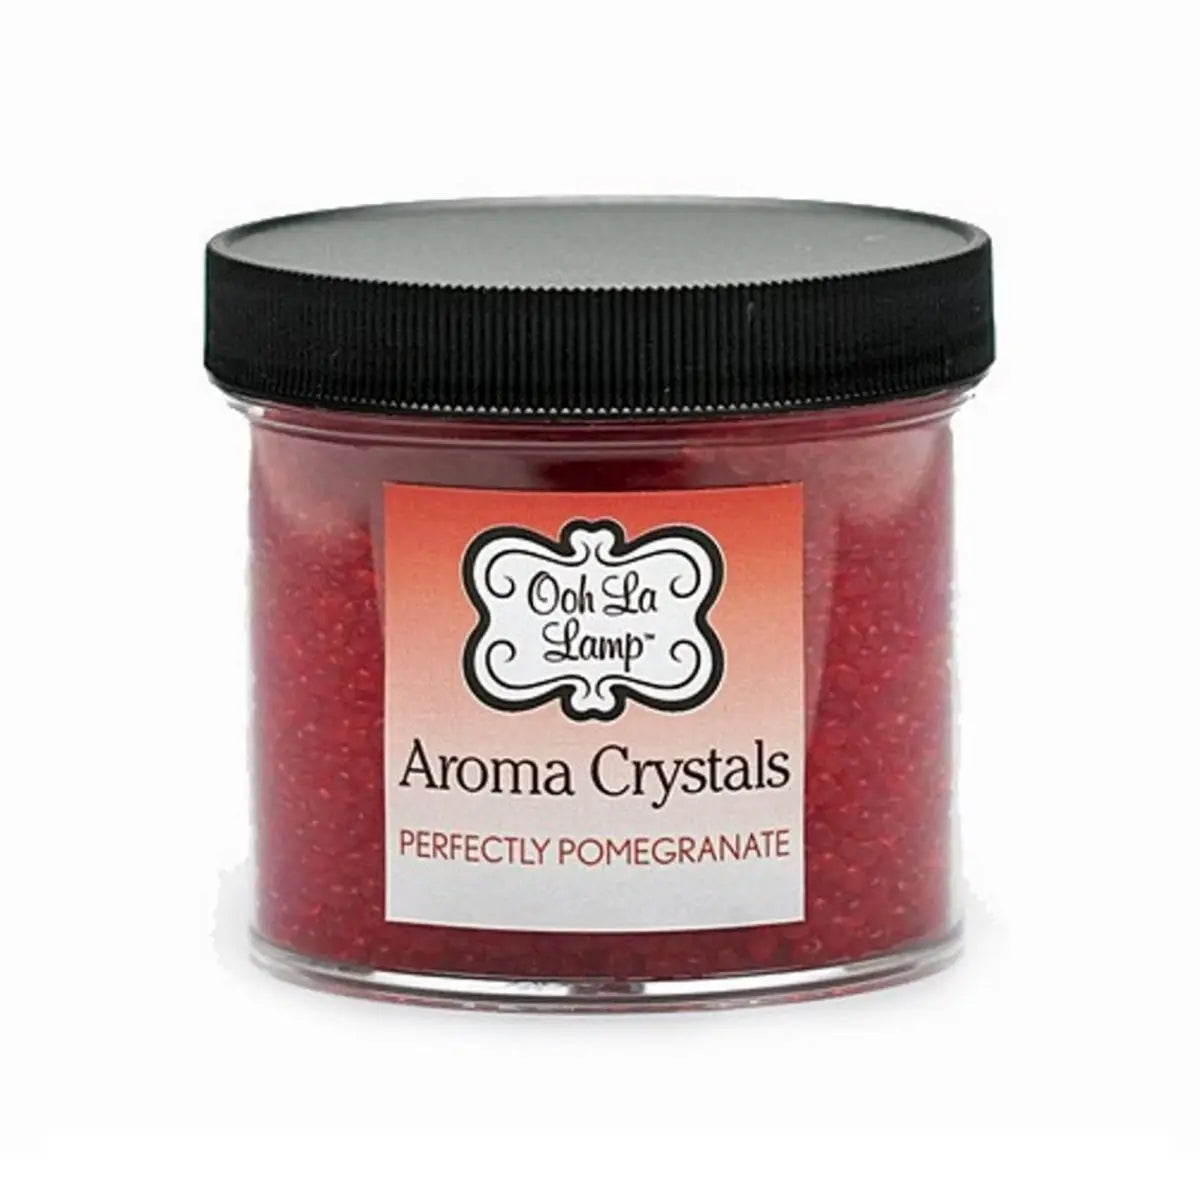 Aroma Crystals: Perfectly Pomegrante